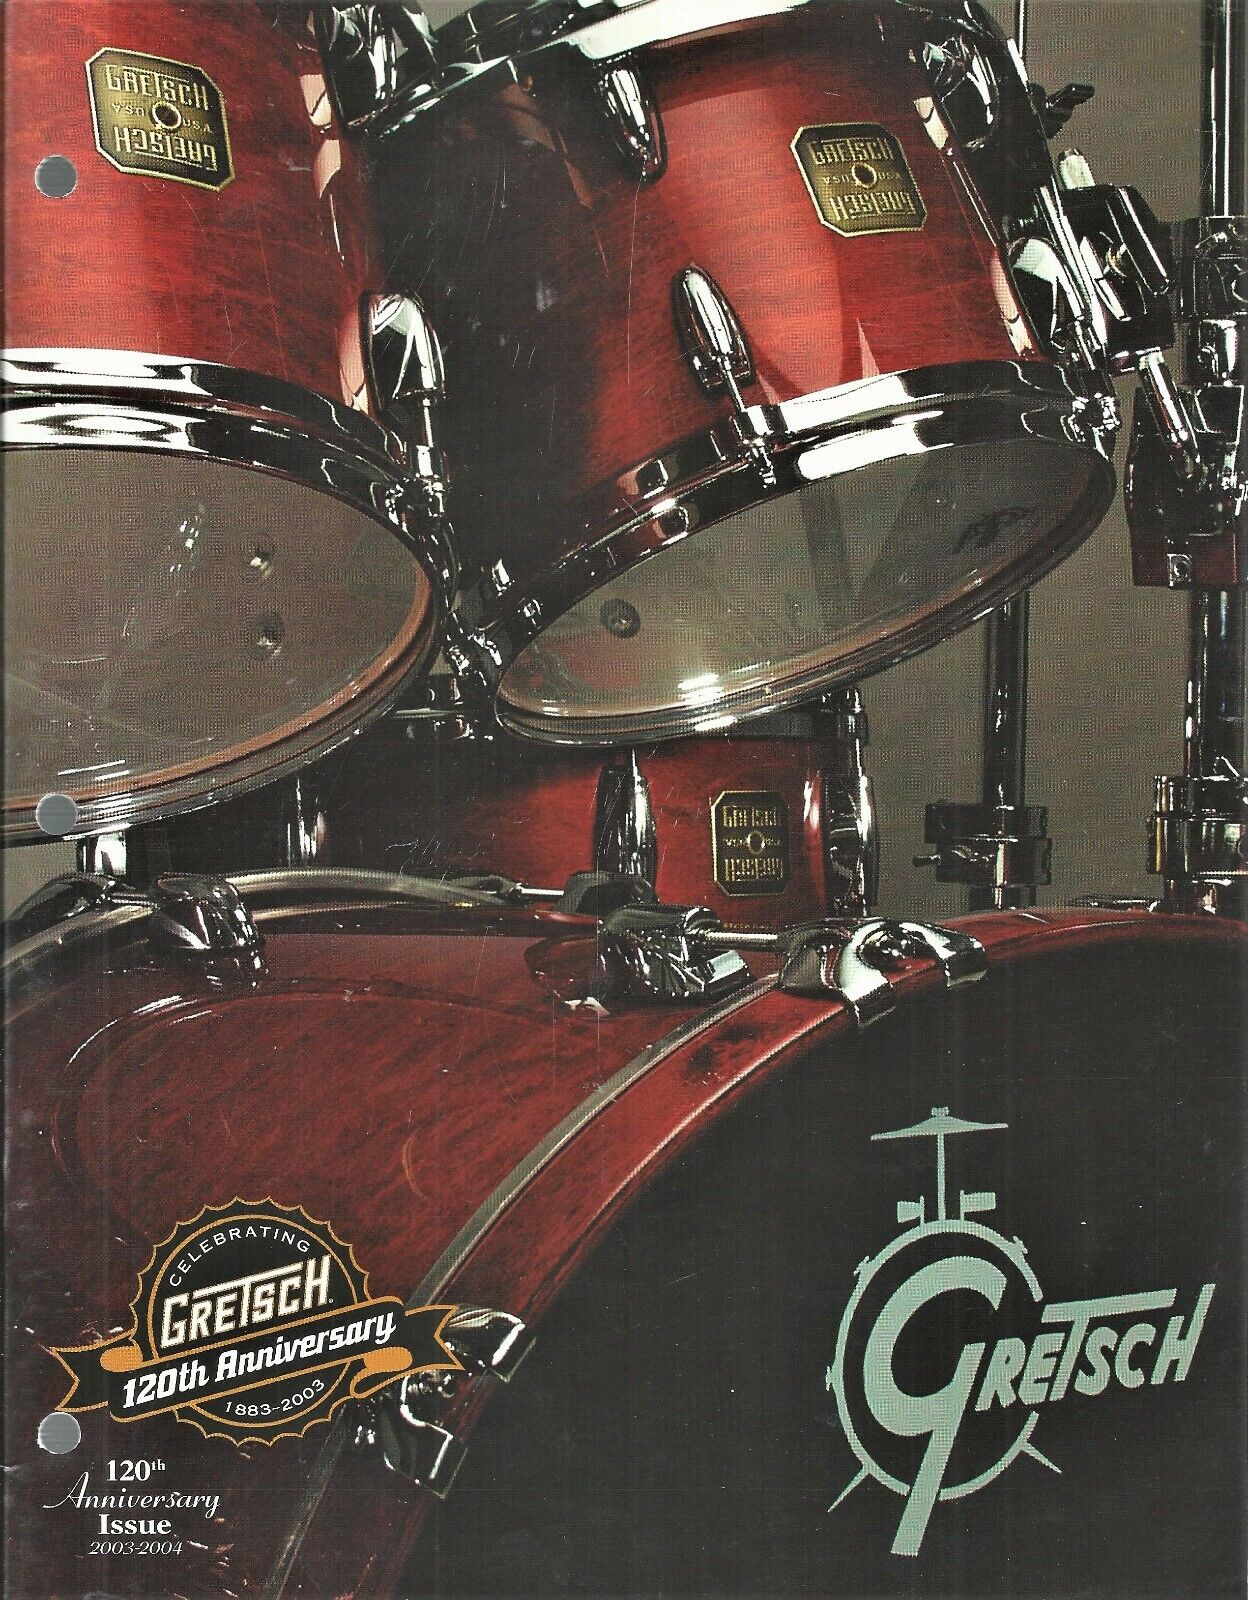 VINTAGE CATALOGUE CELEBRATING GRETSCH 120th Anniversary 1883-2003. 2003/04 issue